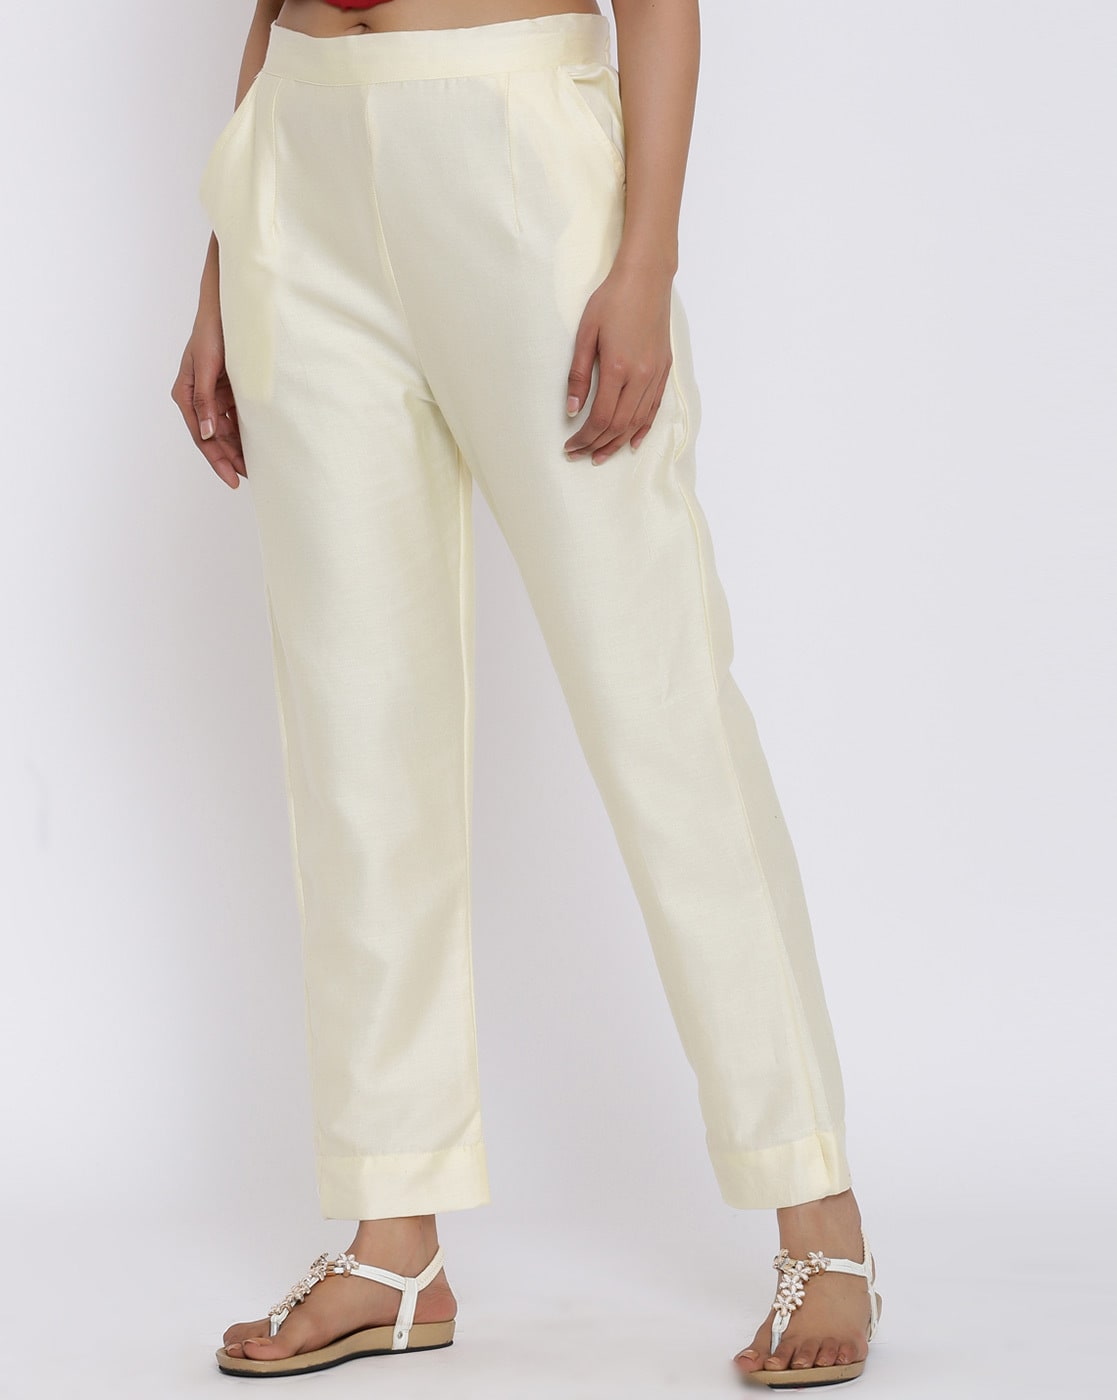 Silk trousers in off-white